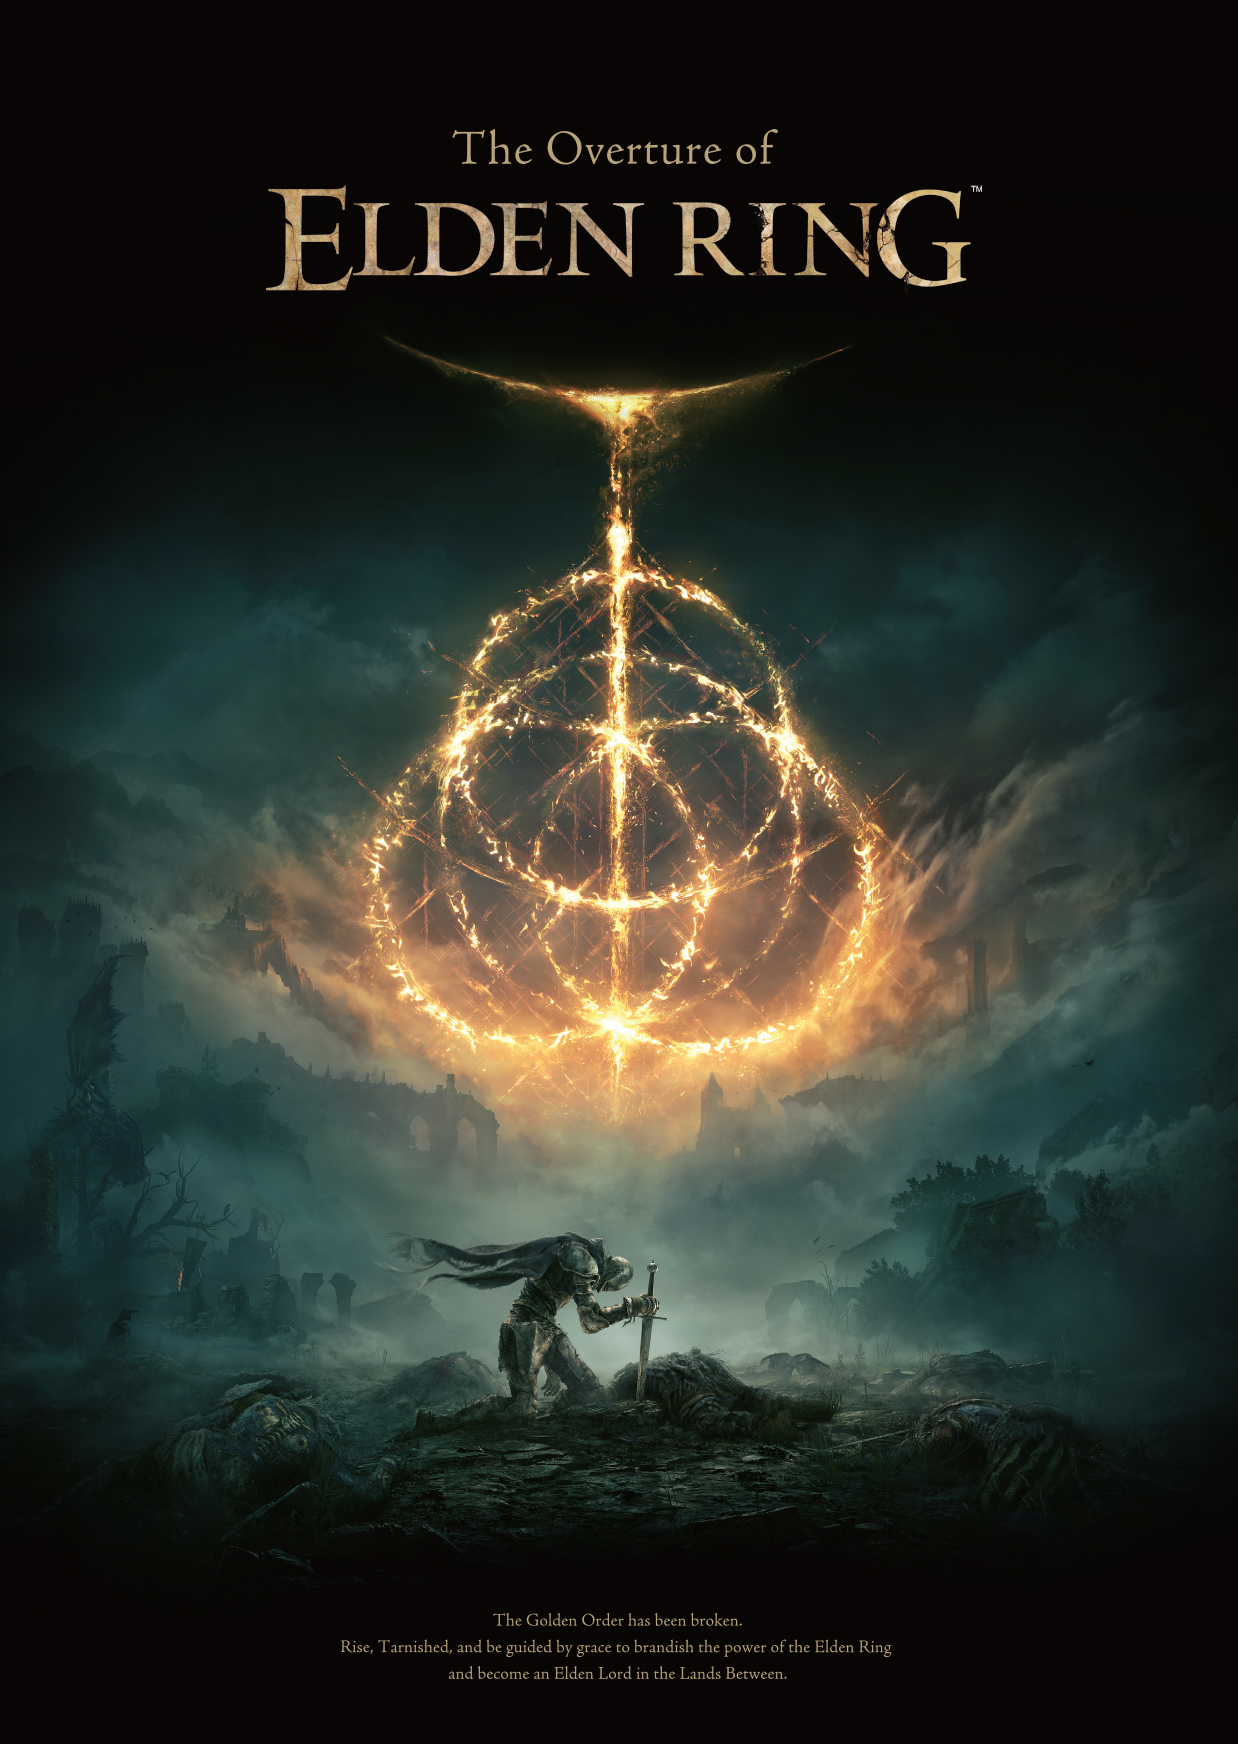 Overture of ELDEN RING book coming out in February